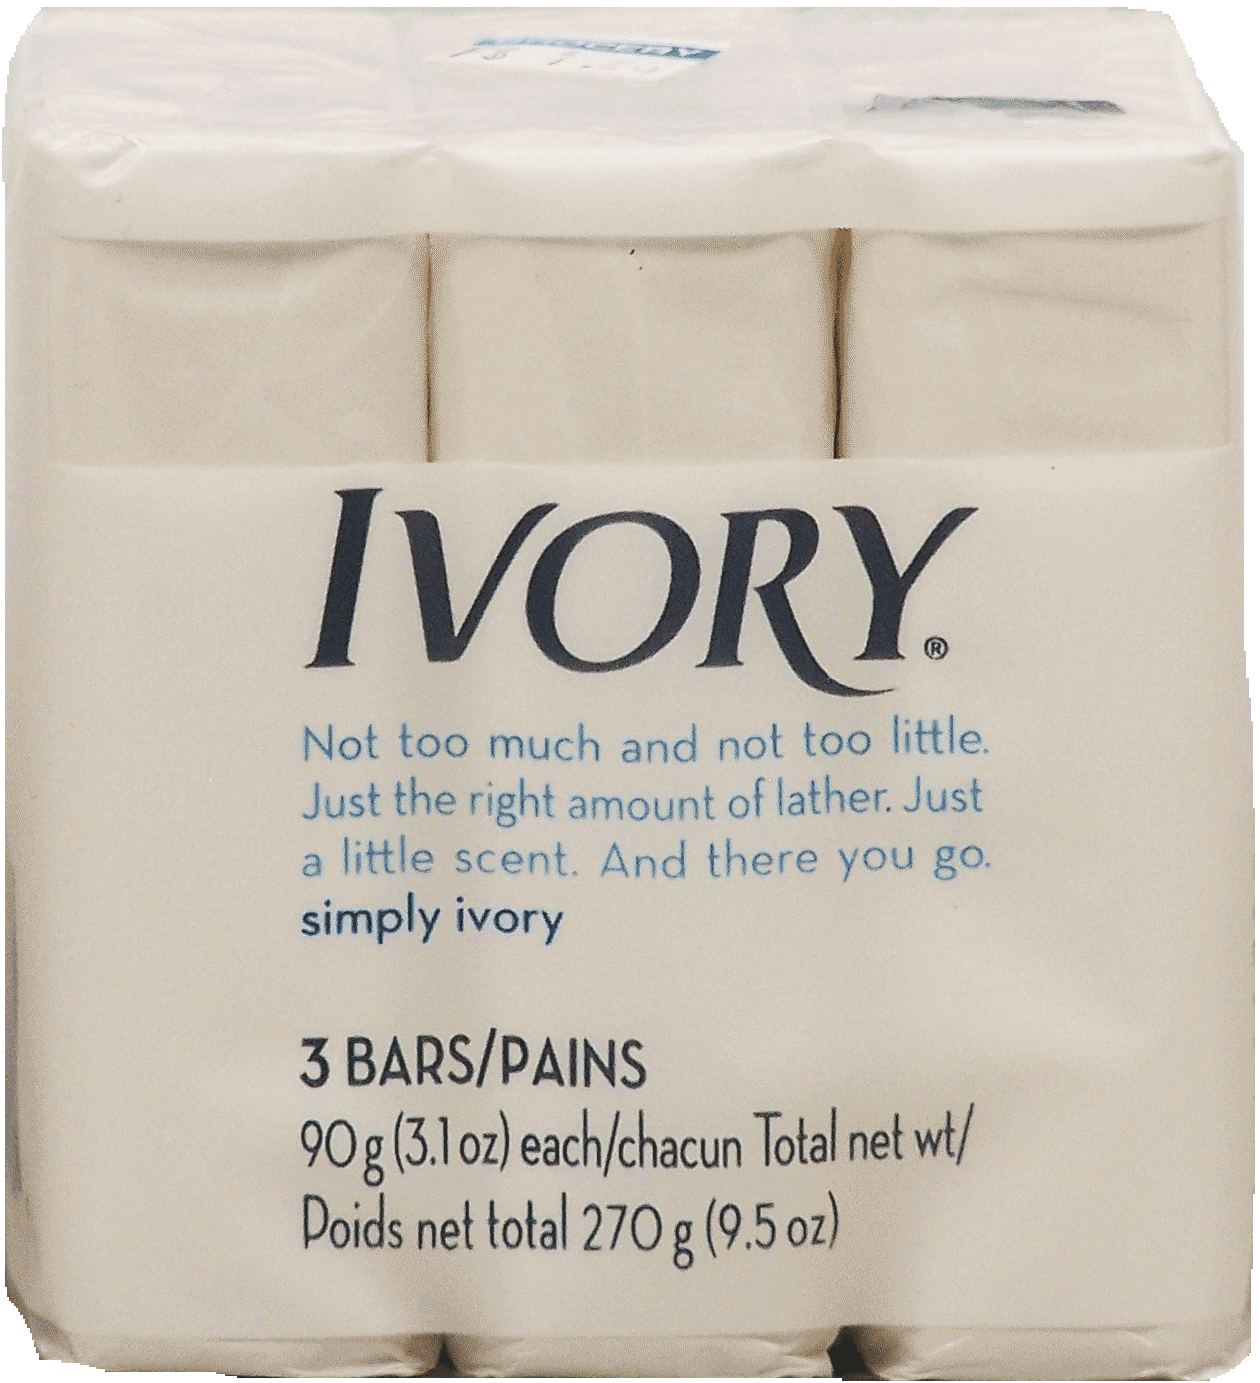 Get Ivory Soap 3 packs for as low as $.40 each at Walgreens